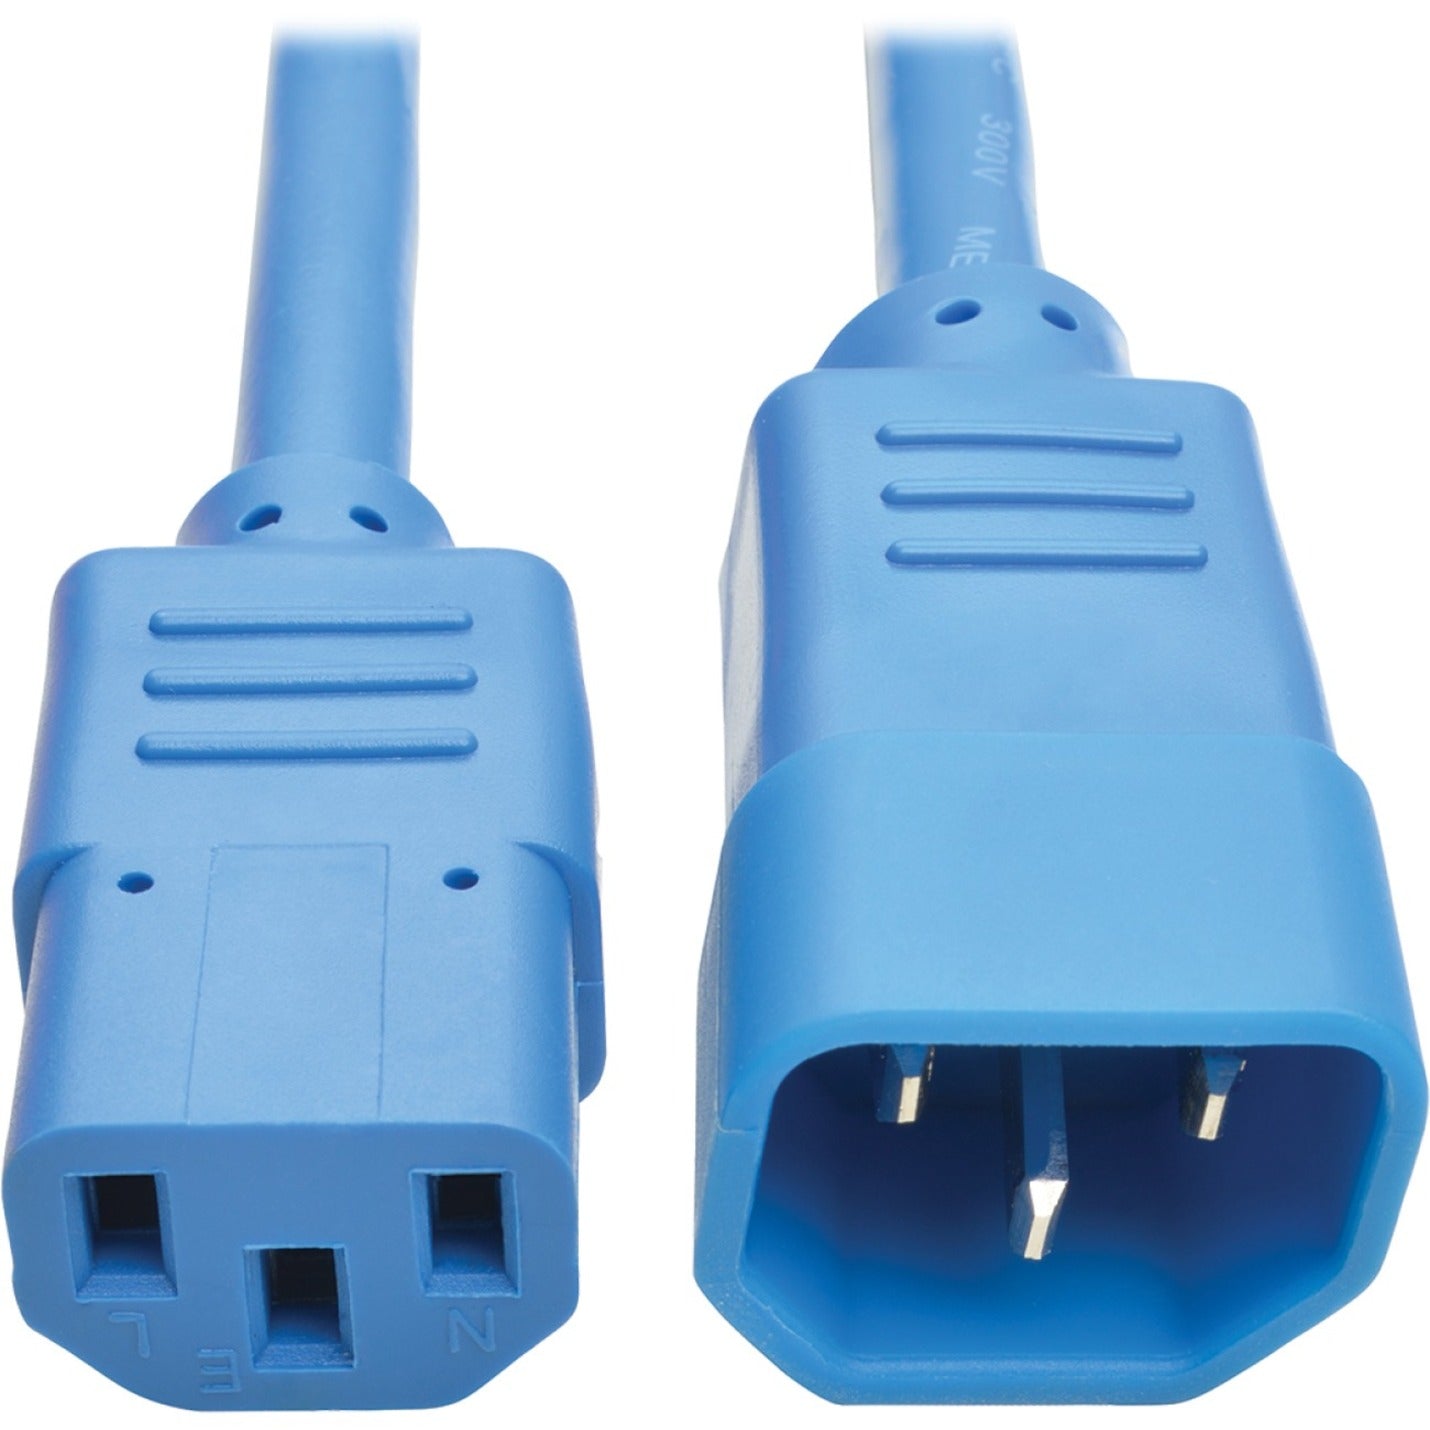 Tripp Lite P005-003-ABL Power Extension Cord, 15A, 14 AWG, 3 ft, Blue